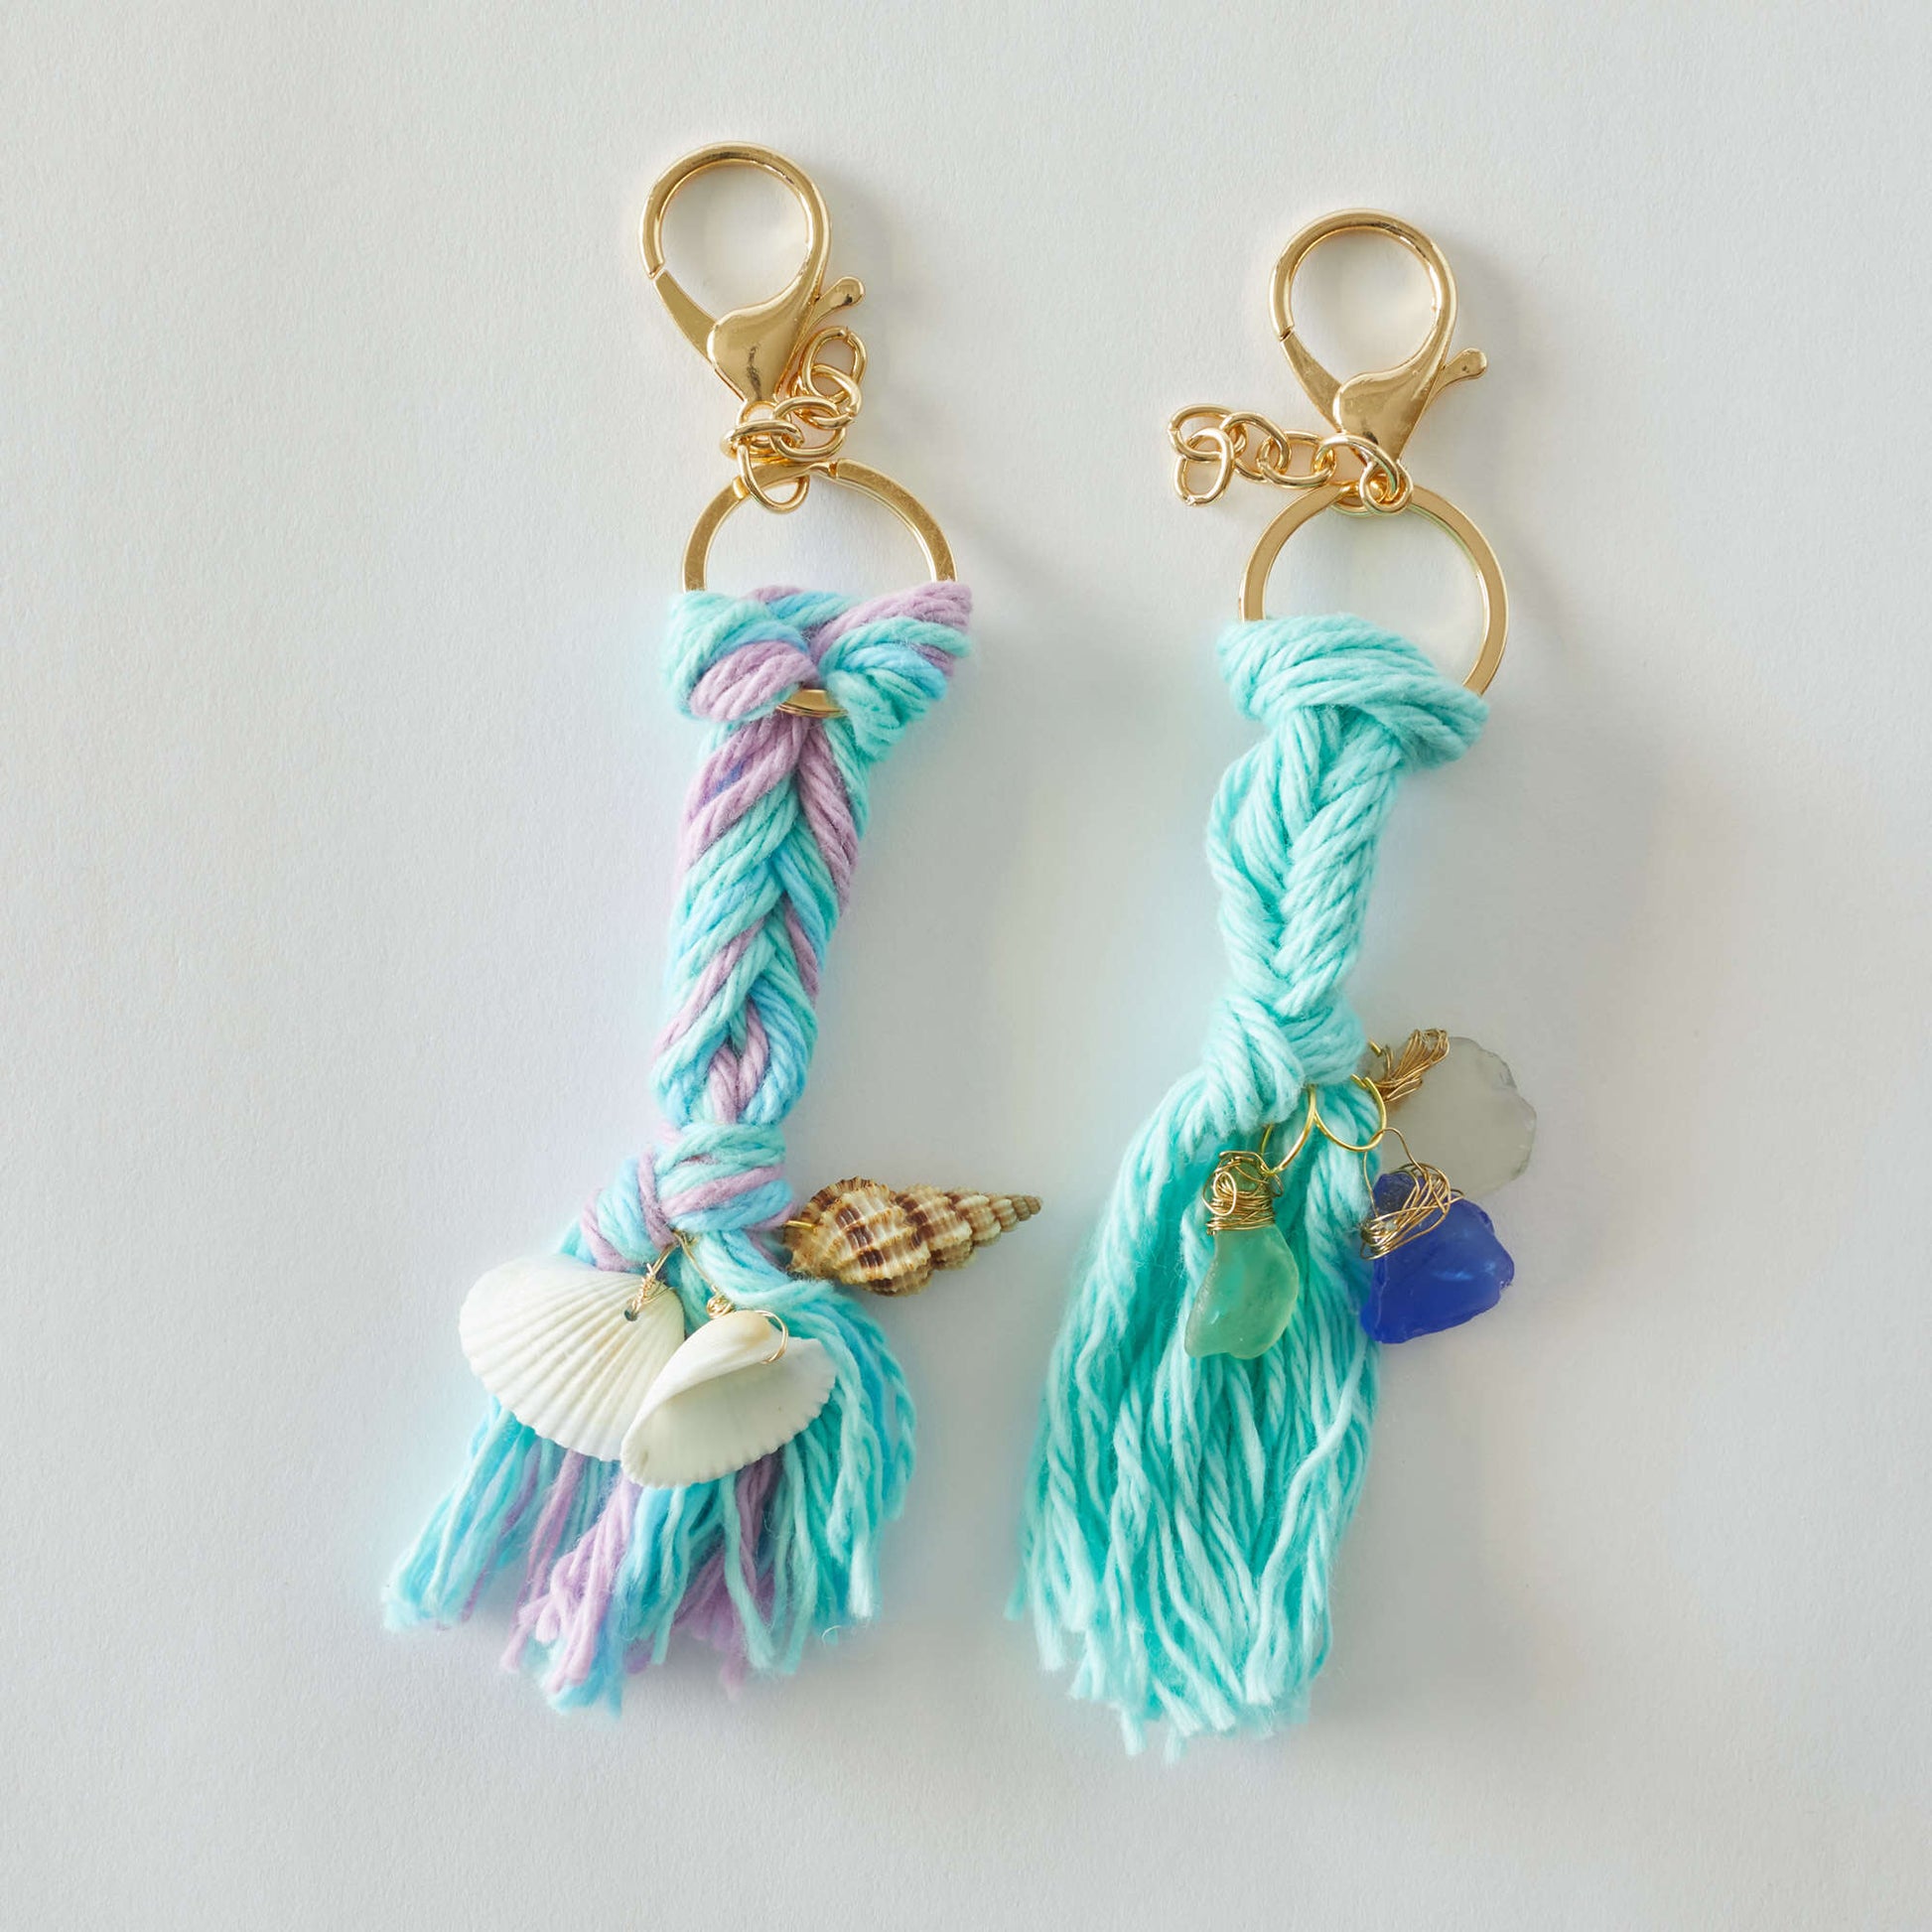 Free Red Heart Mermaid Tails Keychains Craft Pattern